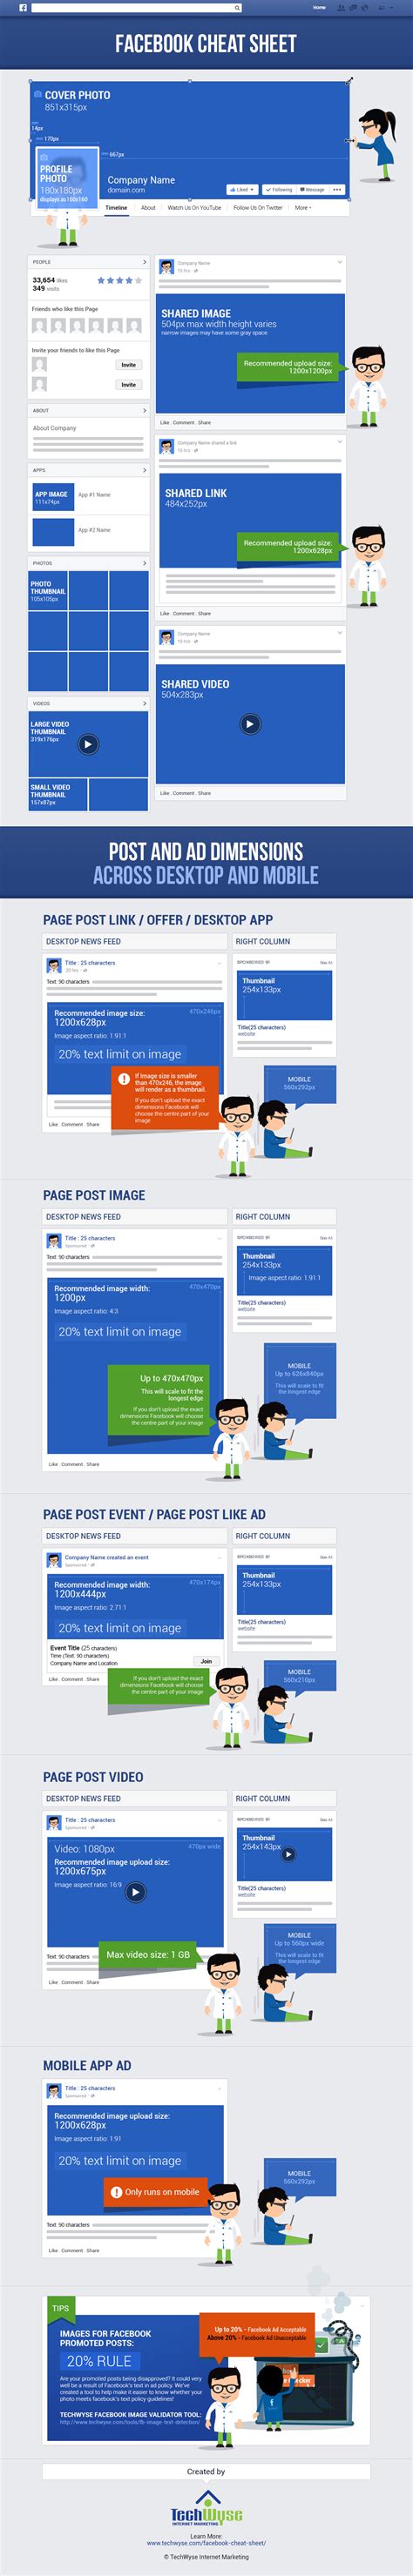 Facebook Dimensions Image Sizes Cheat Sheet 2023